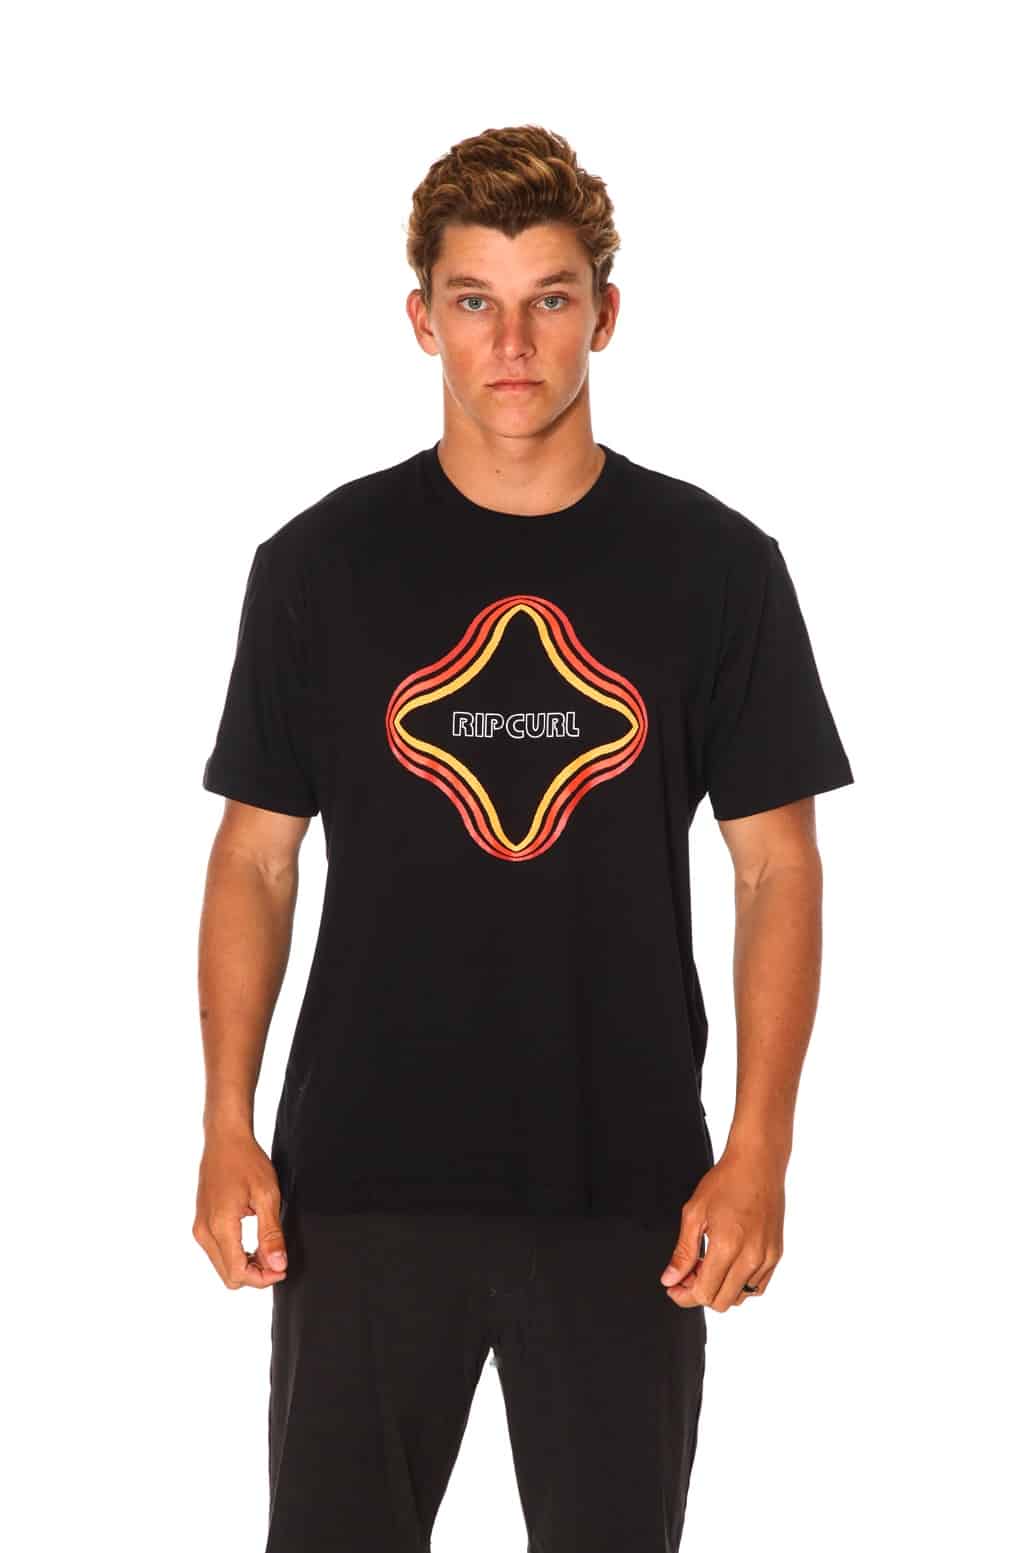 SURF REVIVAL VIBRATIONS TEE